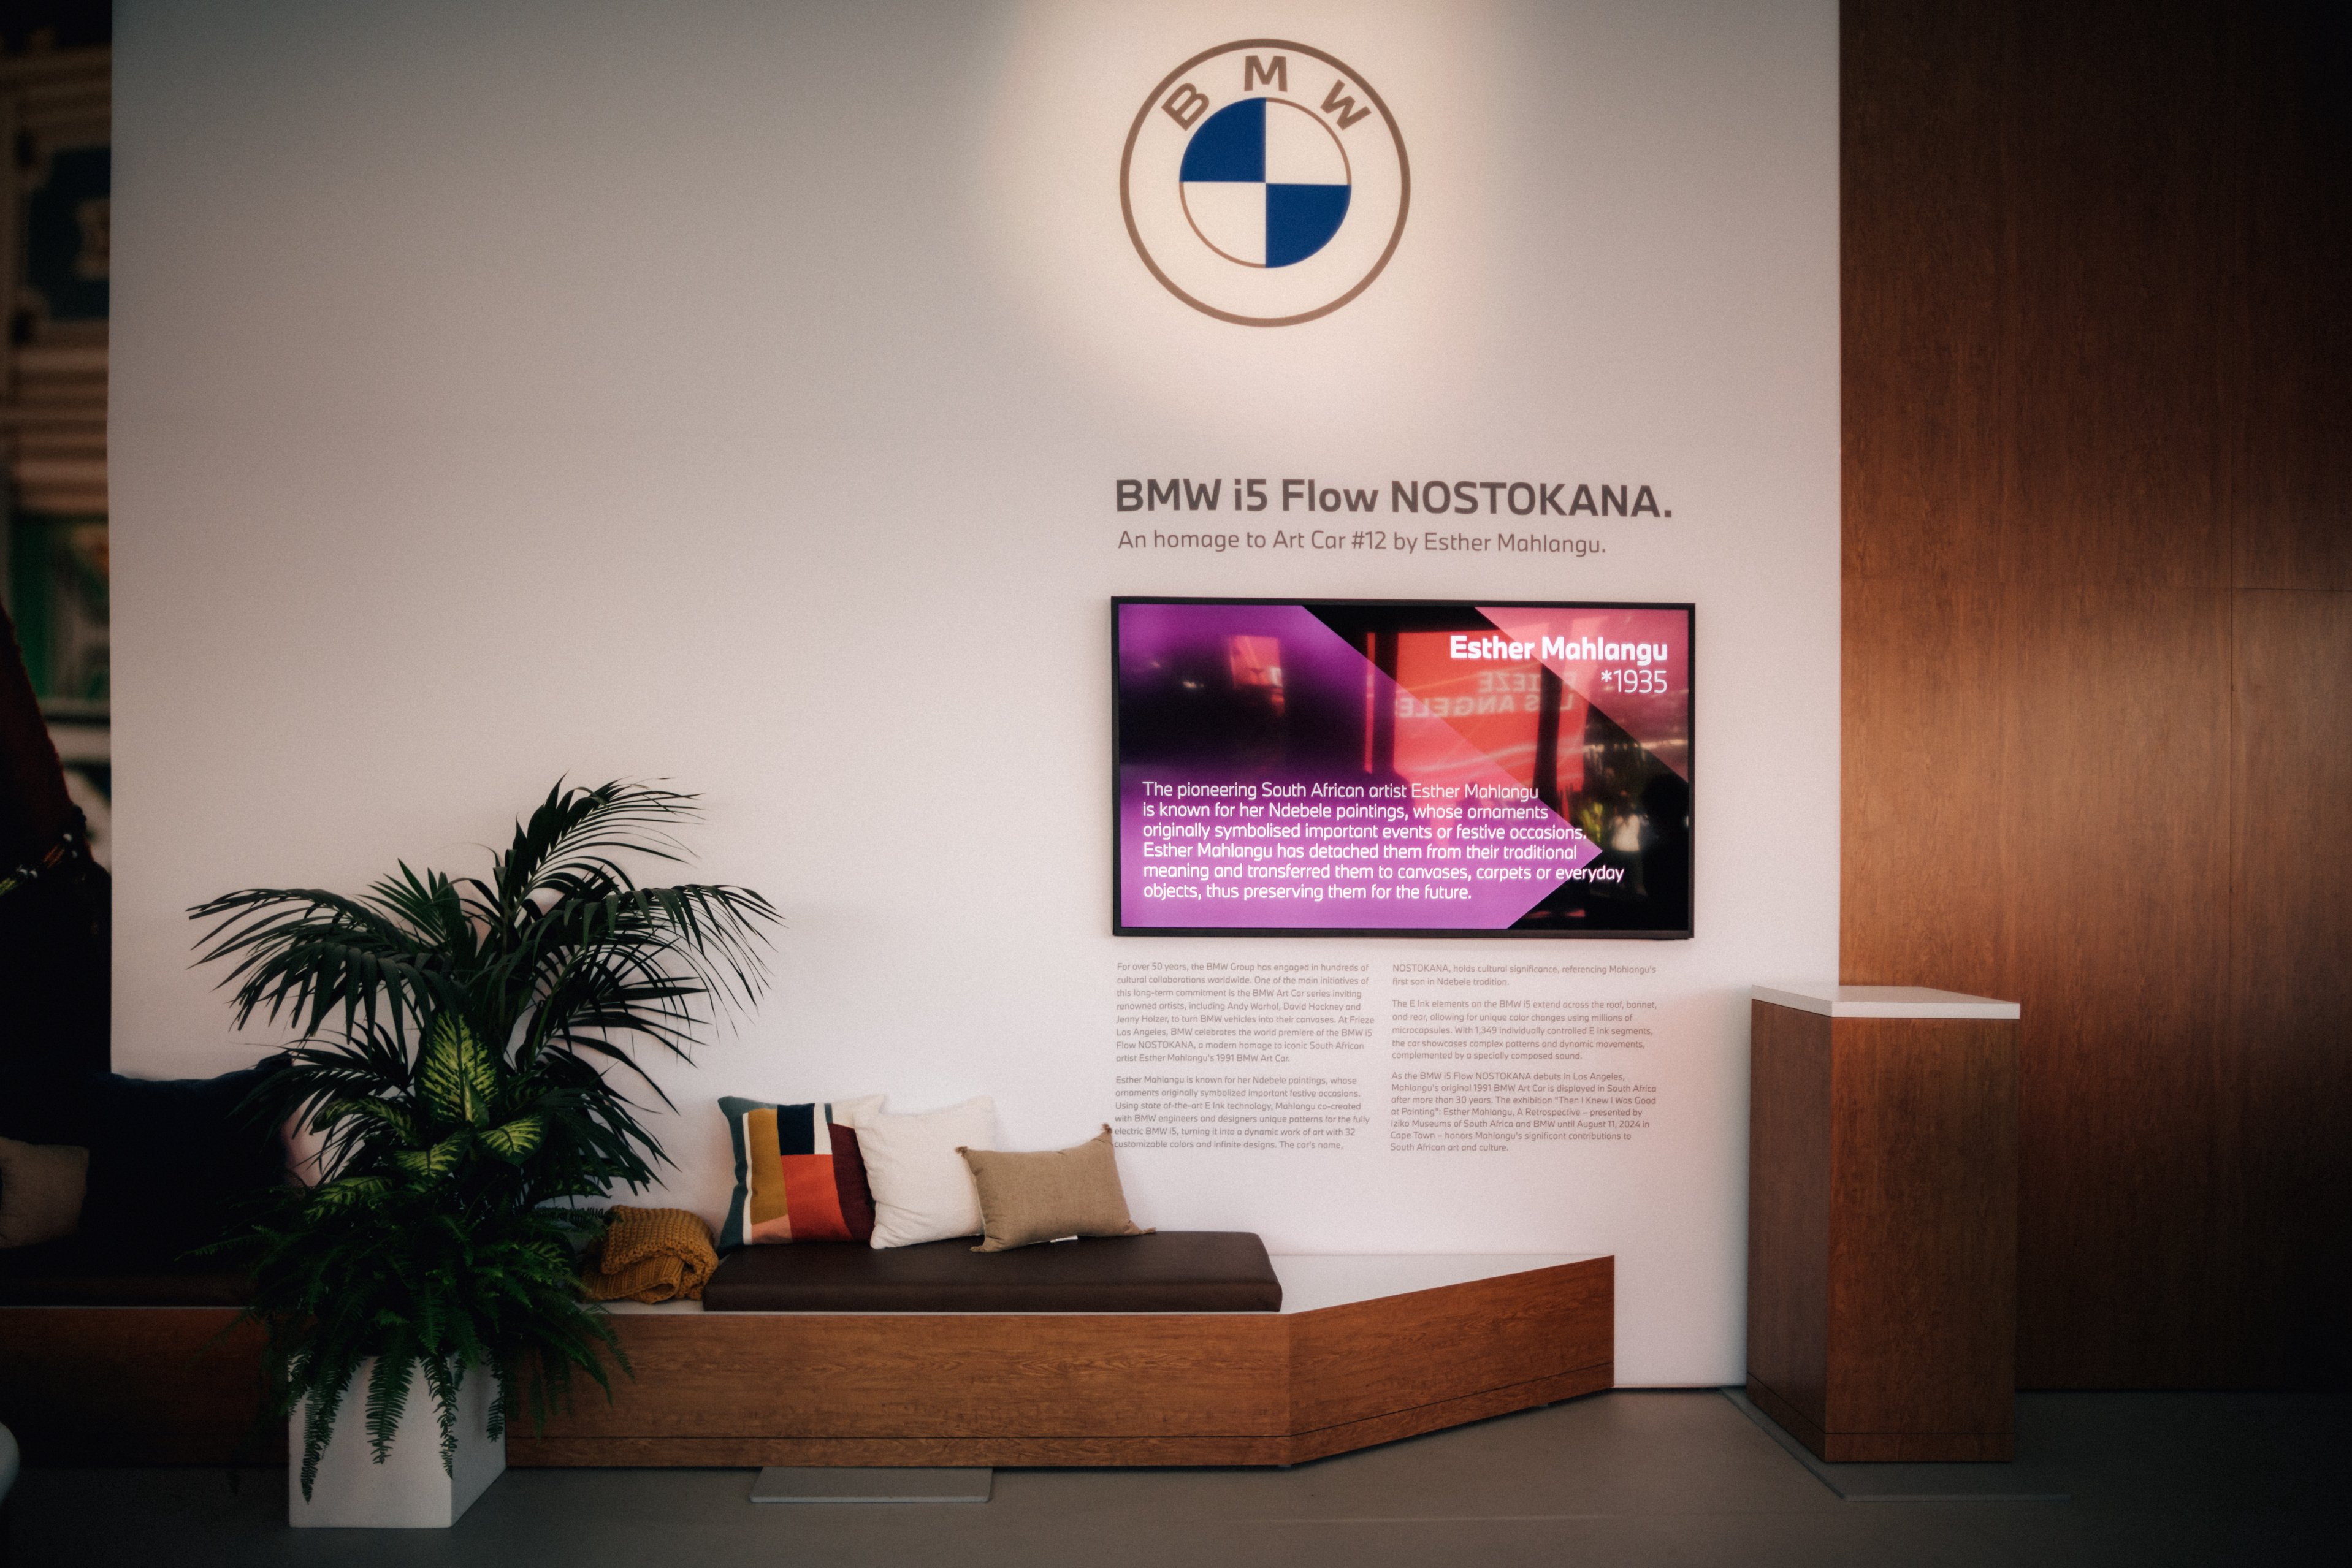 BMW exhibition space with a promotional display for the BMW i5 Flow NOSTOKANA, including a monitor with Esther Mahlangu&#x27;s artwork